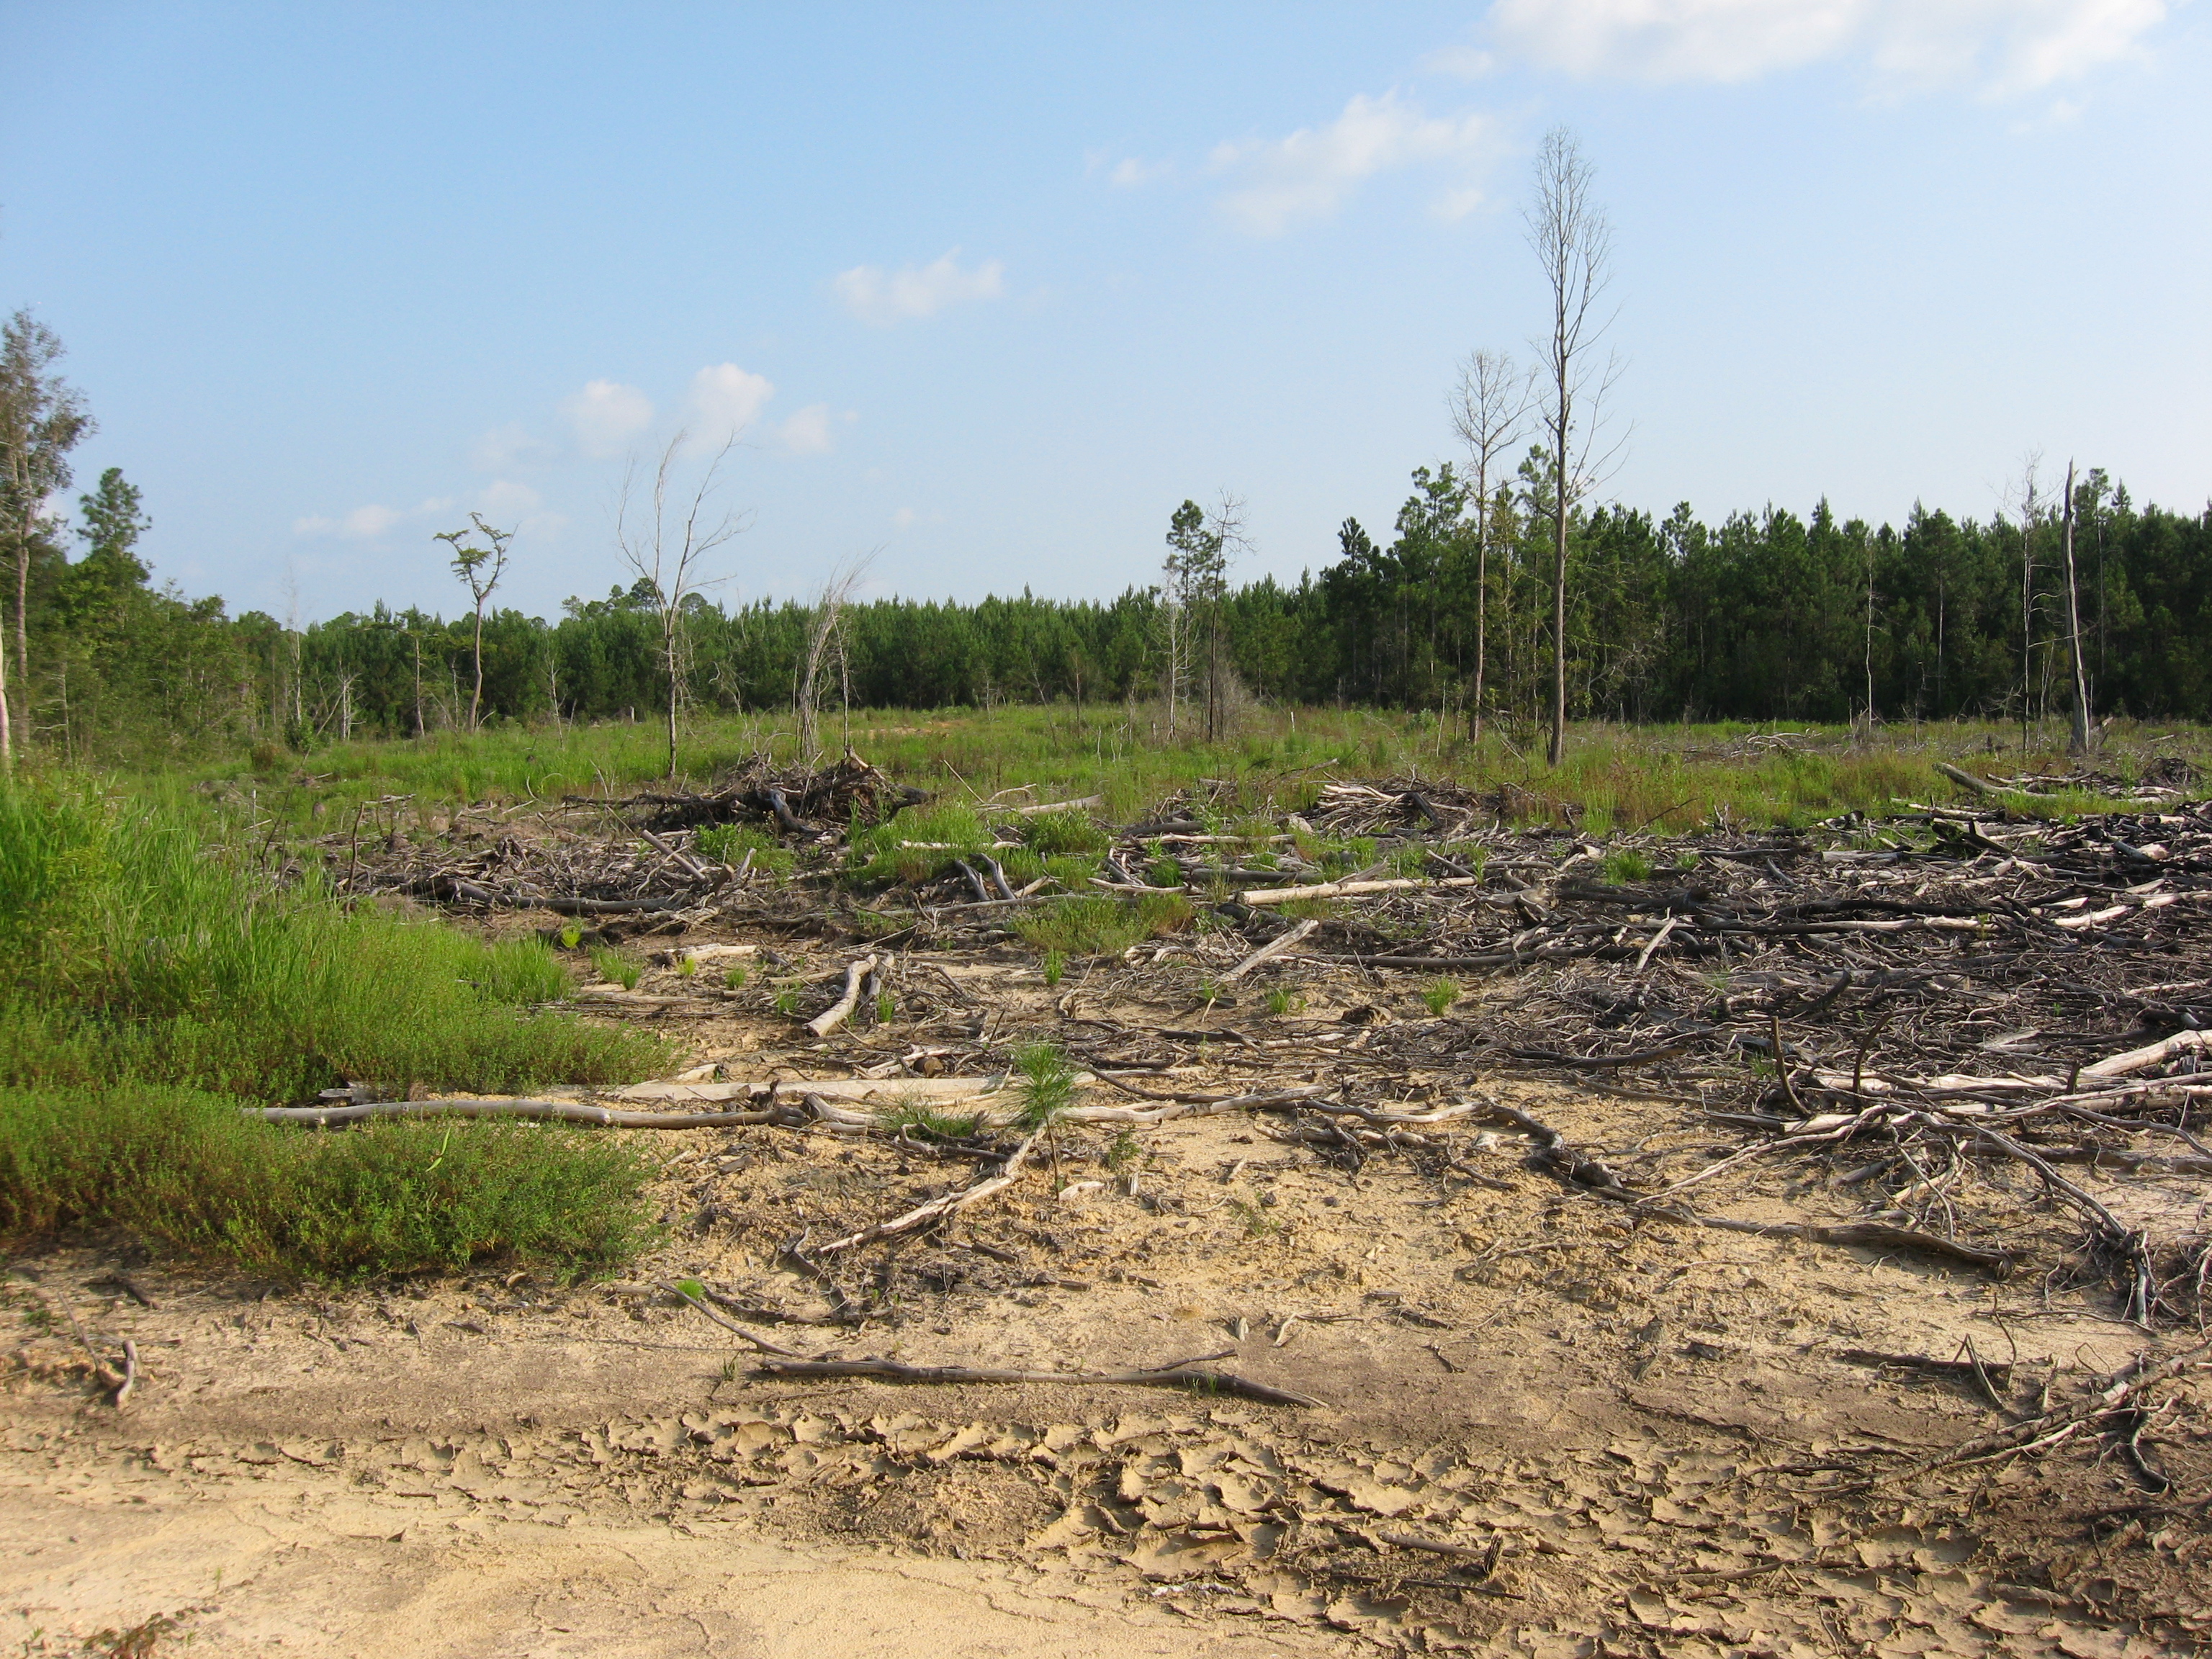 Land that has been deforested.